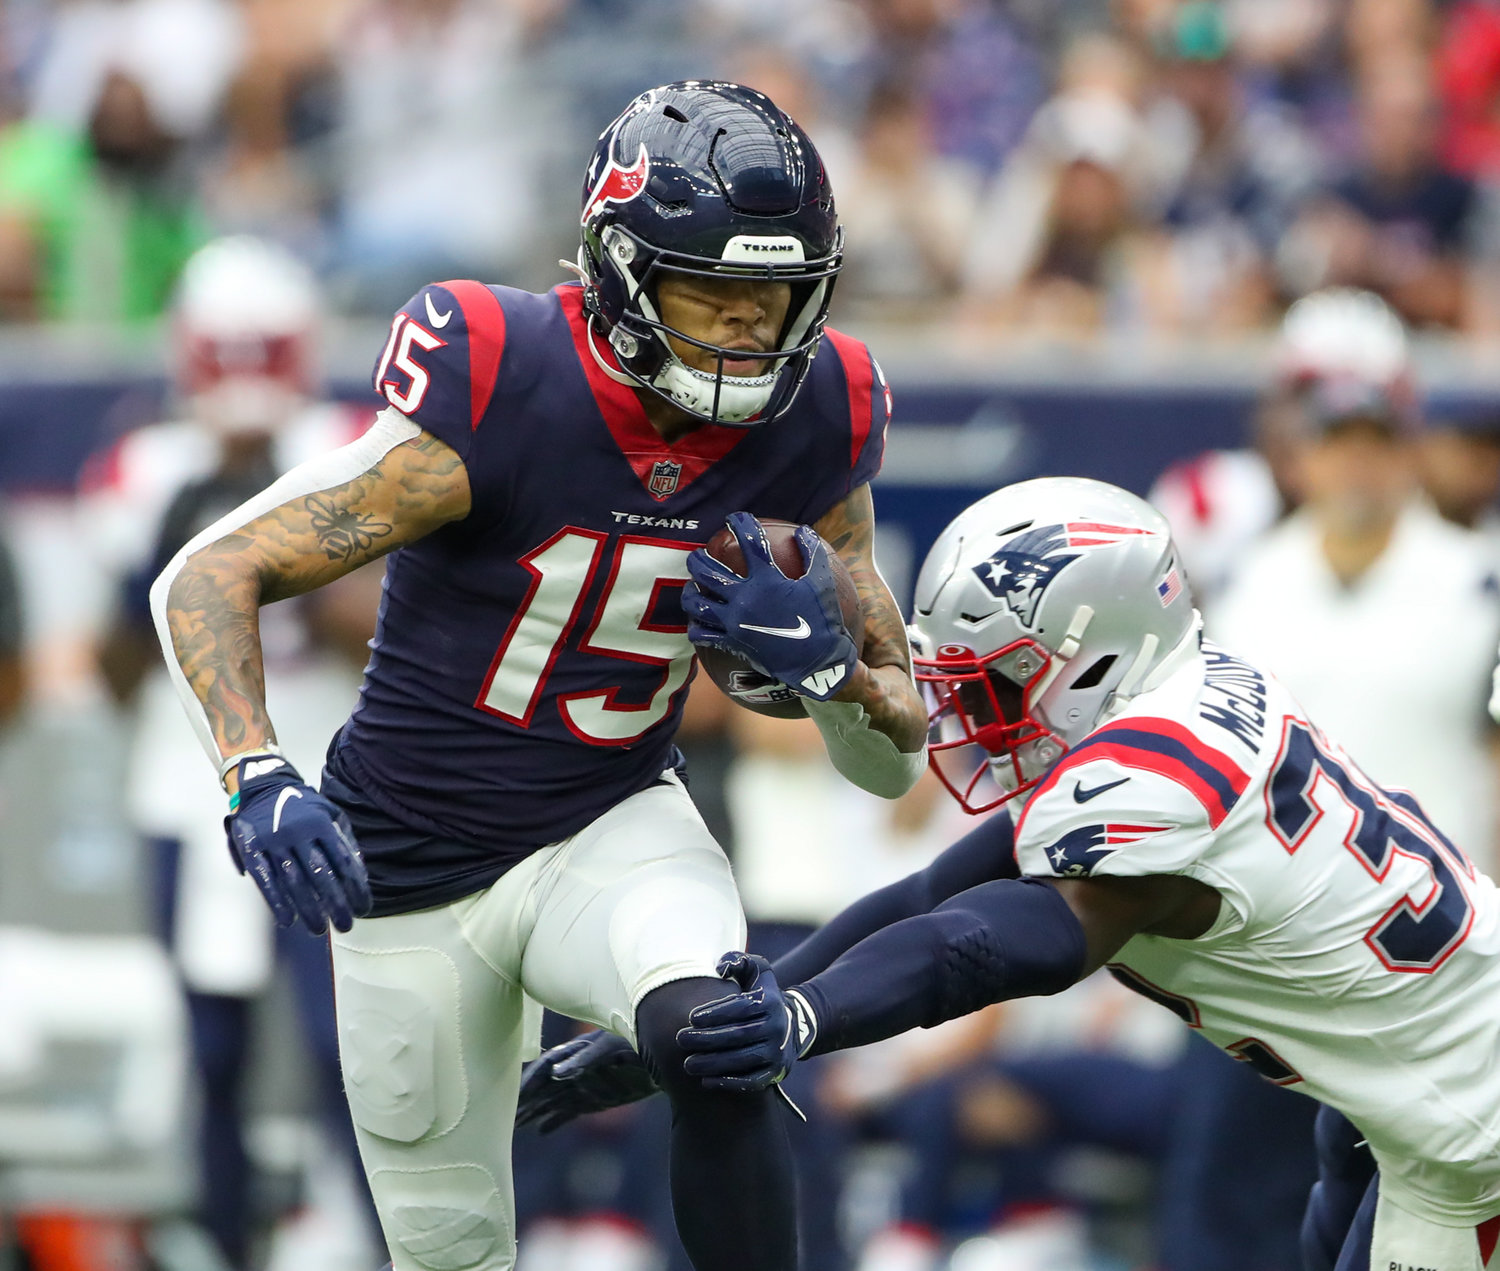 Houston Texans wide receiver Chris Moore (15) carries the ball during an NFL game between Houston and New England on October 10, 2021 in Houston, Texas. The Patriots won 25-22.